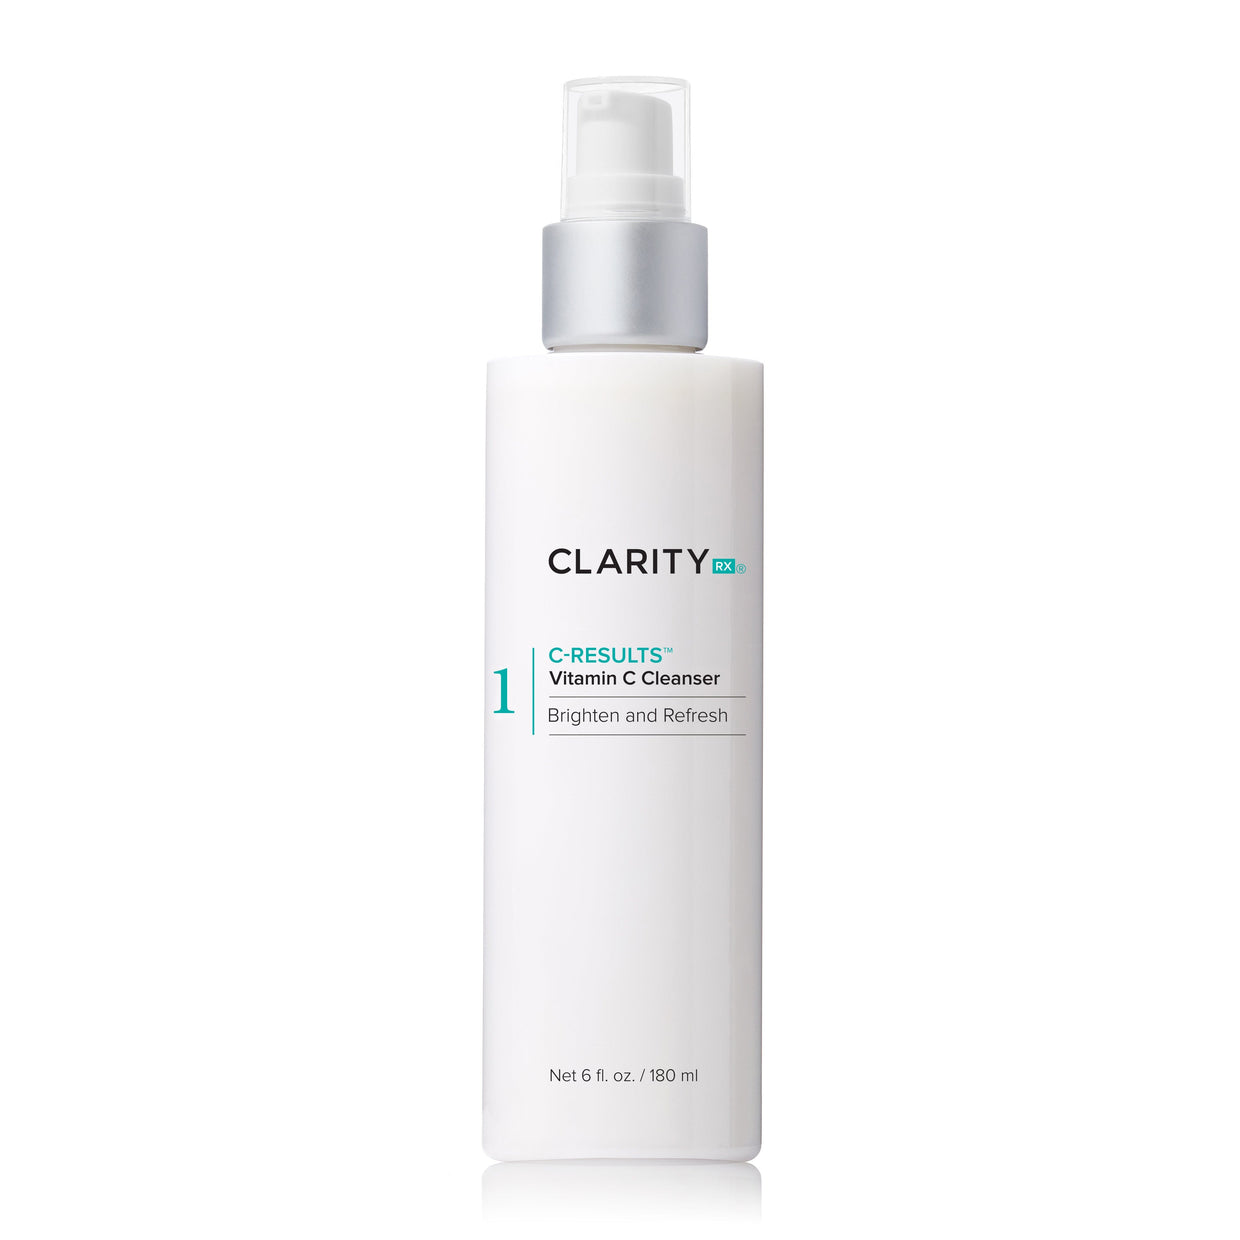 ClarityRx C-Results Vitamin C Cleanser ClarityRx 6 oz. Shop at Exclusive Beauty Club